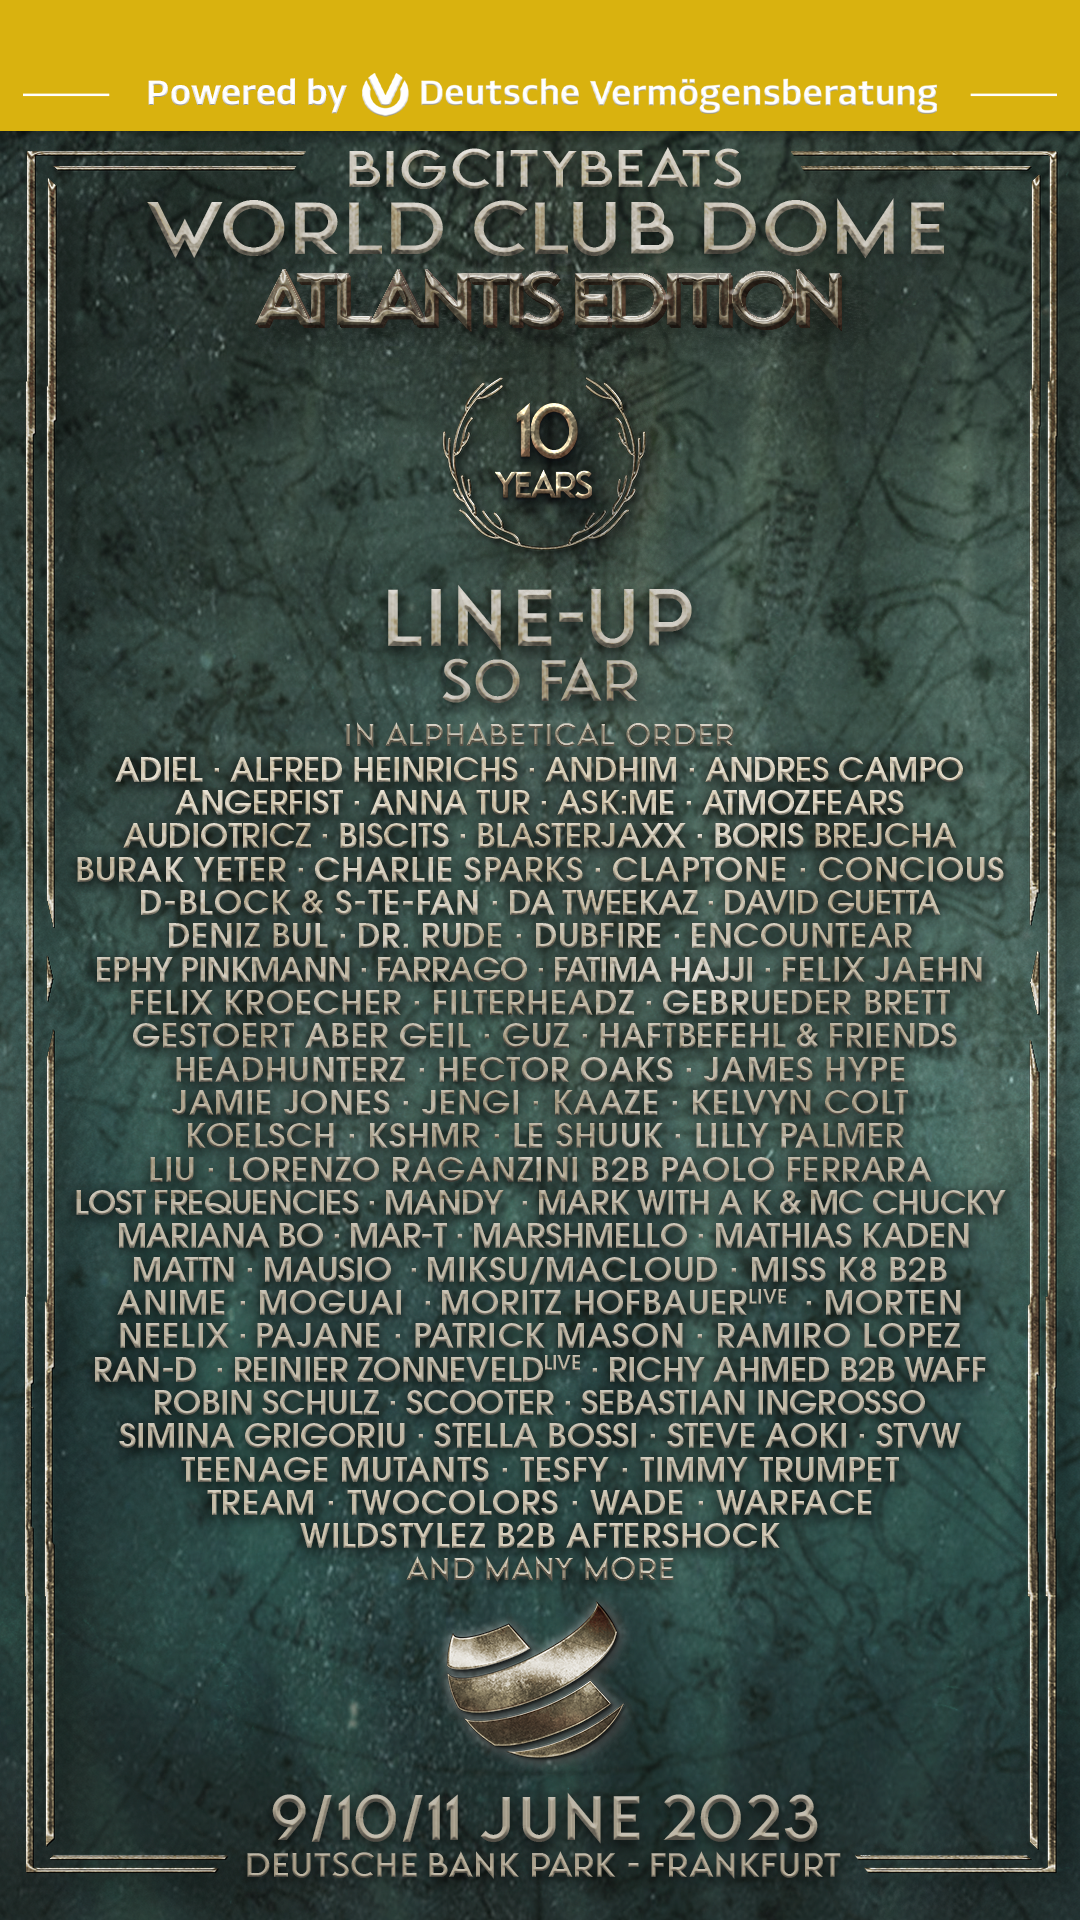 wcd23_lineup-phase-3_dvag_9x16.png